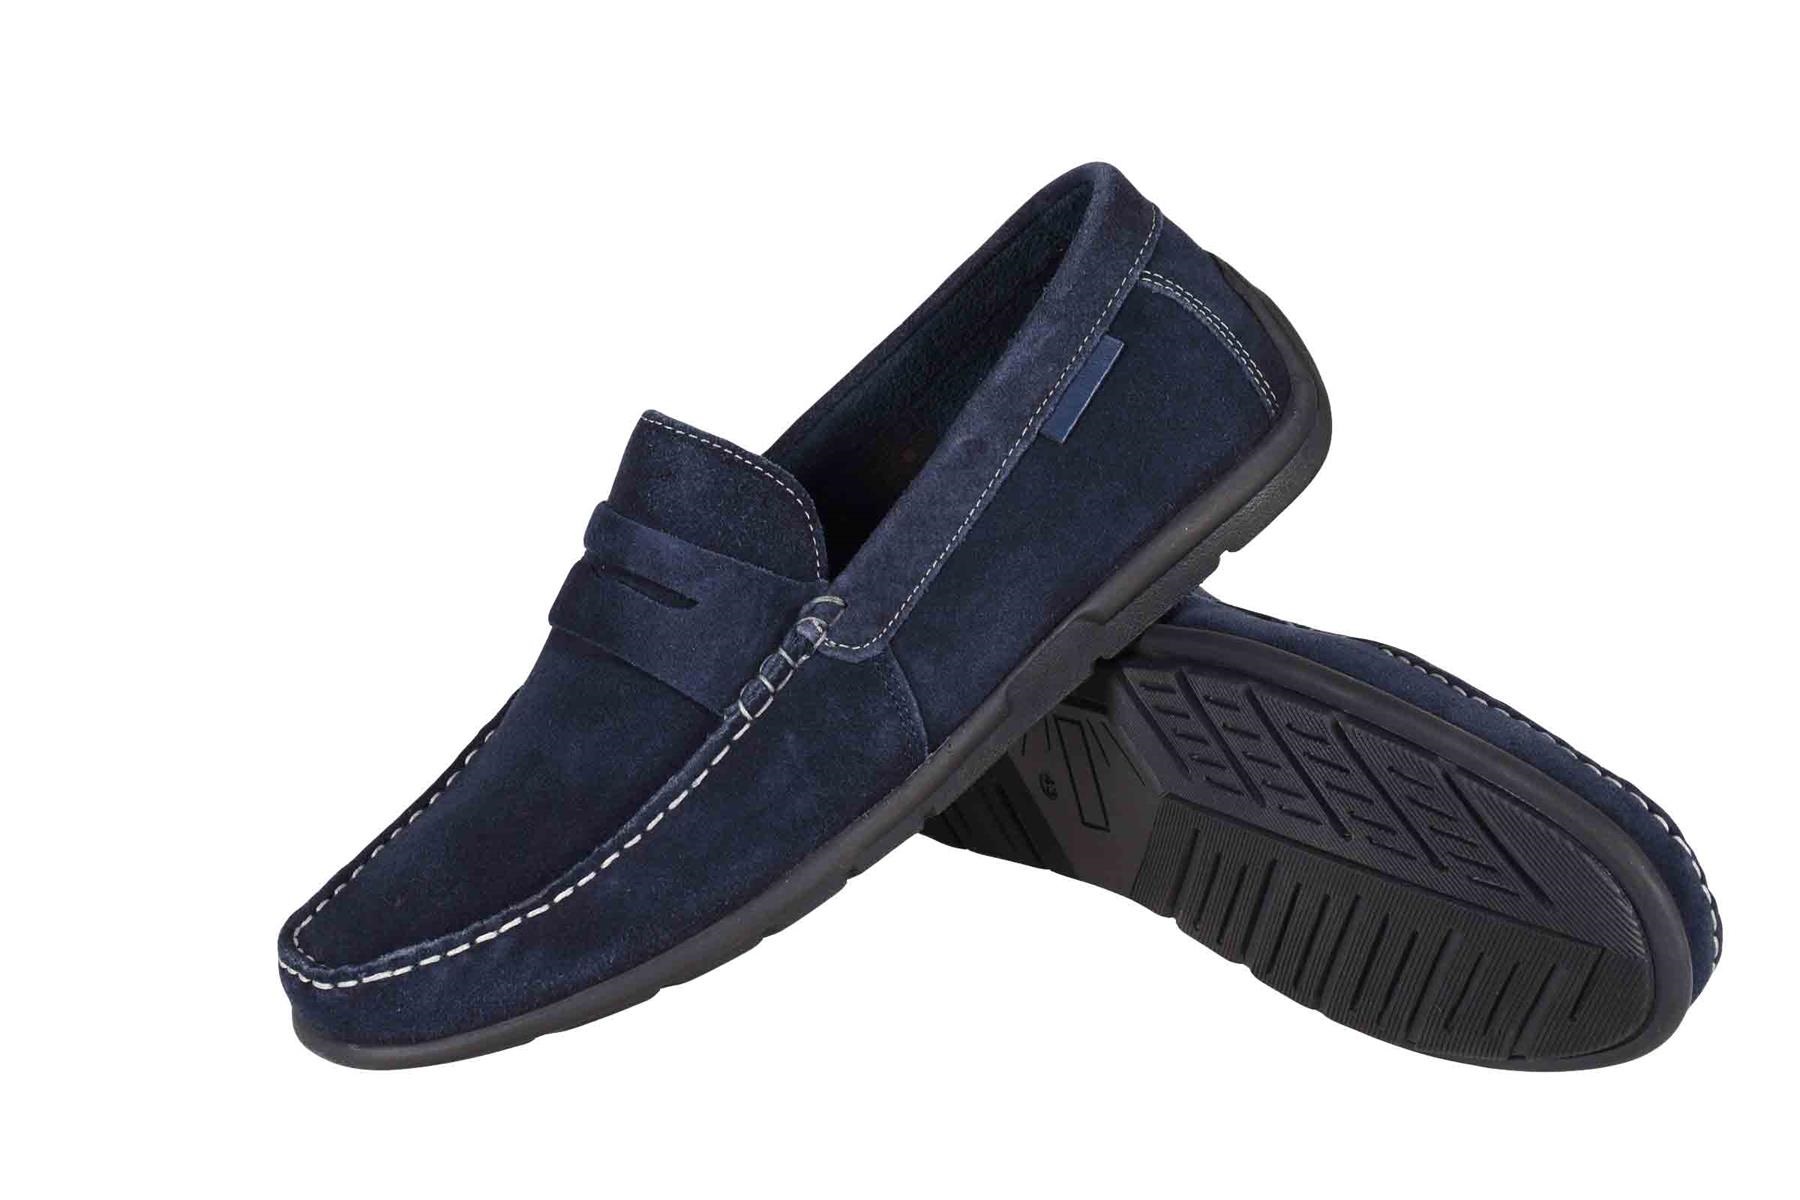 Men's CATESBY Hardward Casual Moccasin Leather Loafer Shoes - Navy Suede